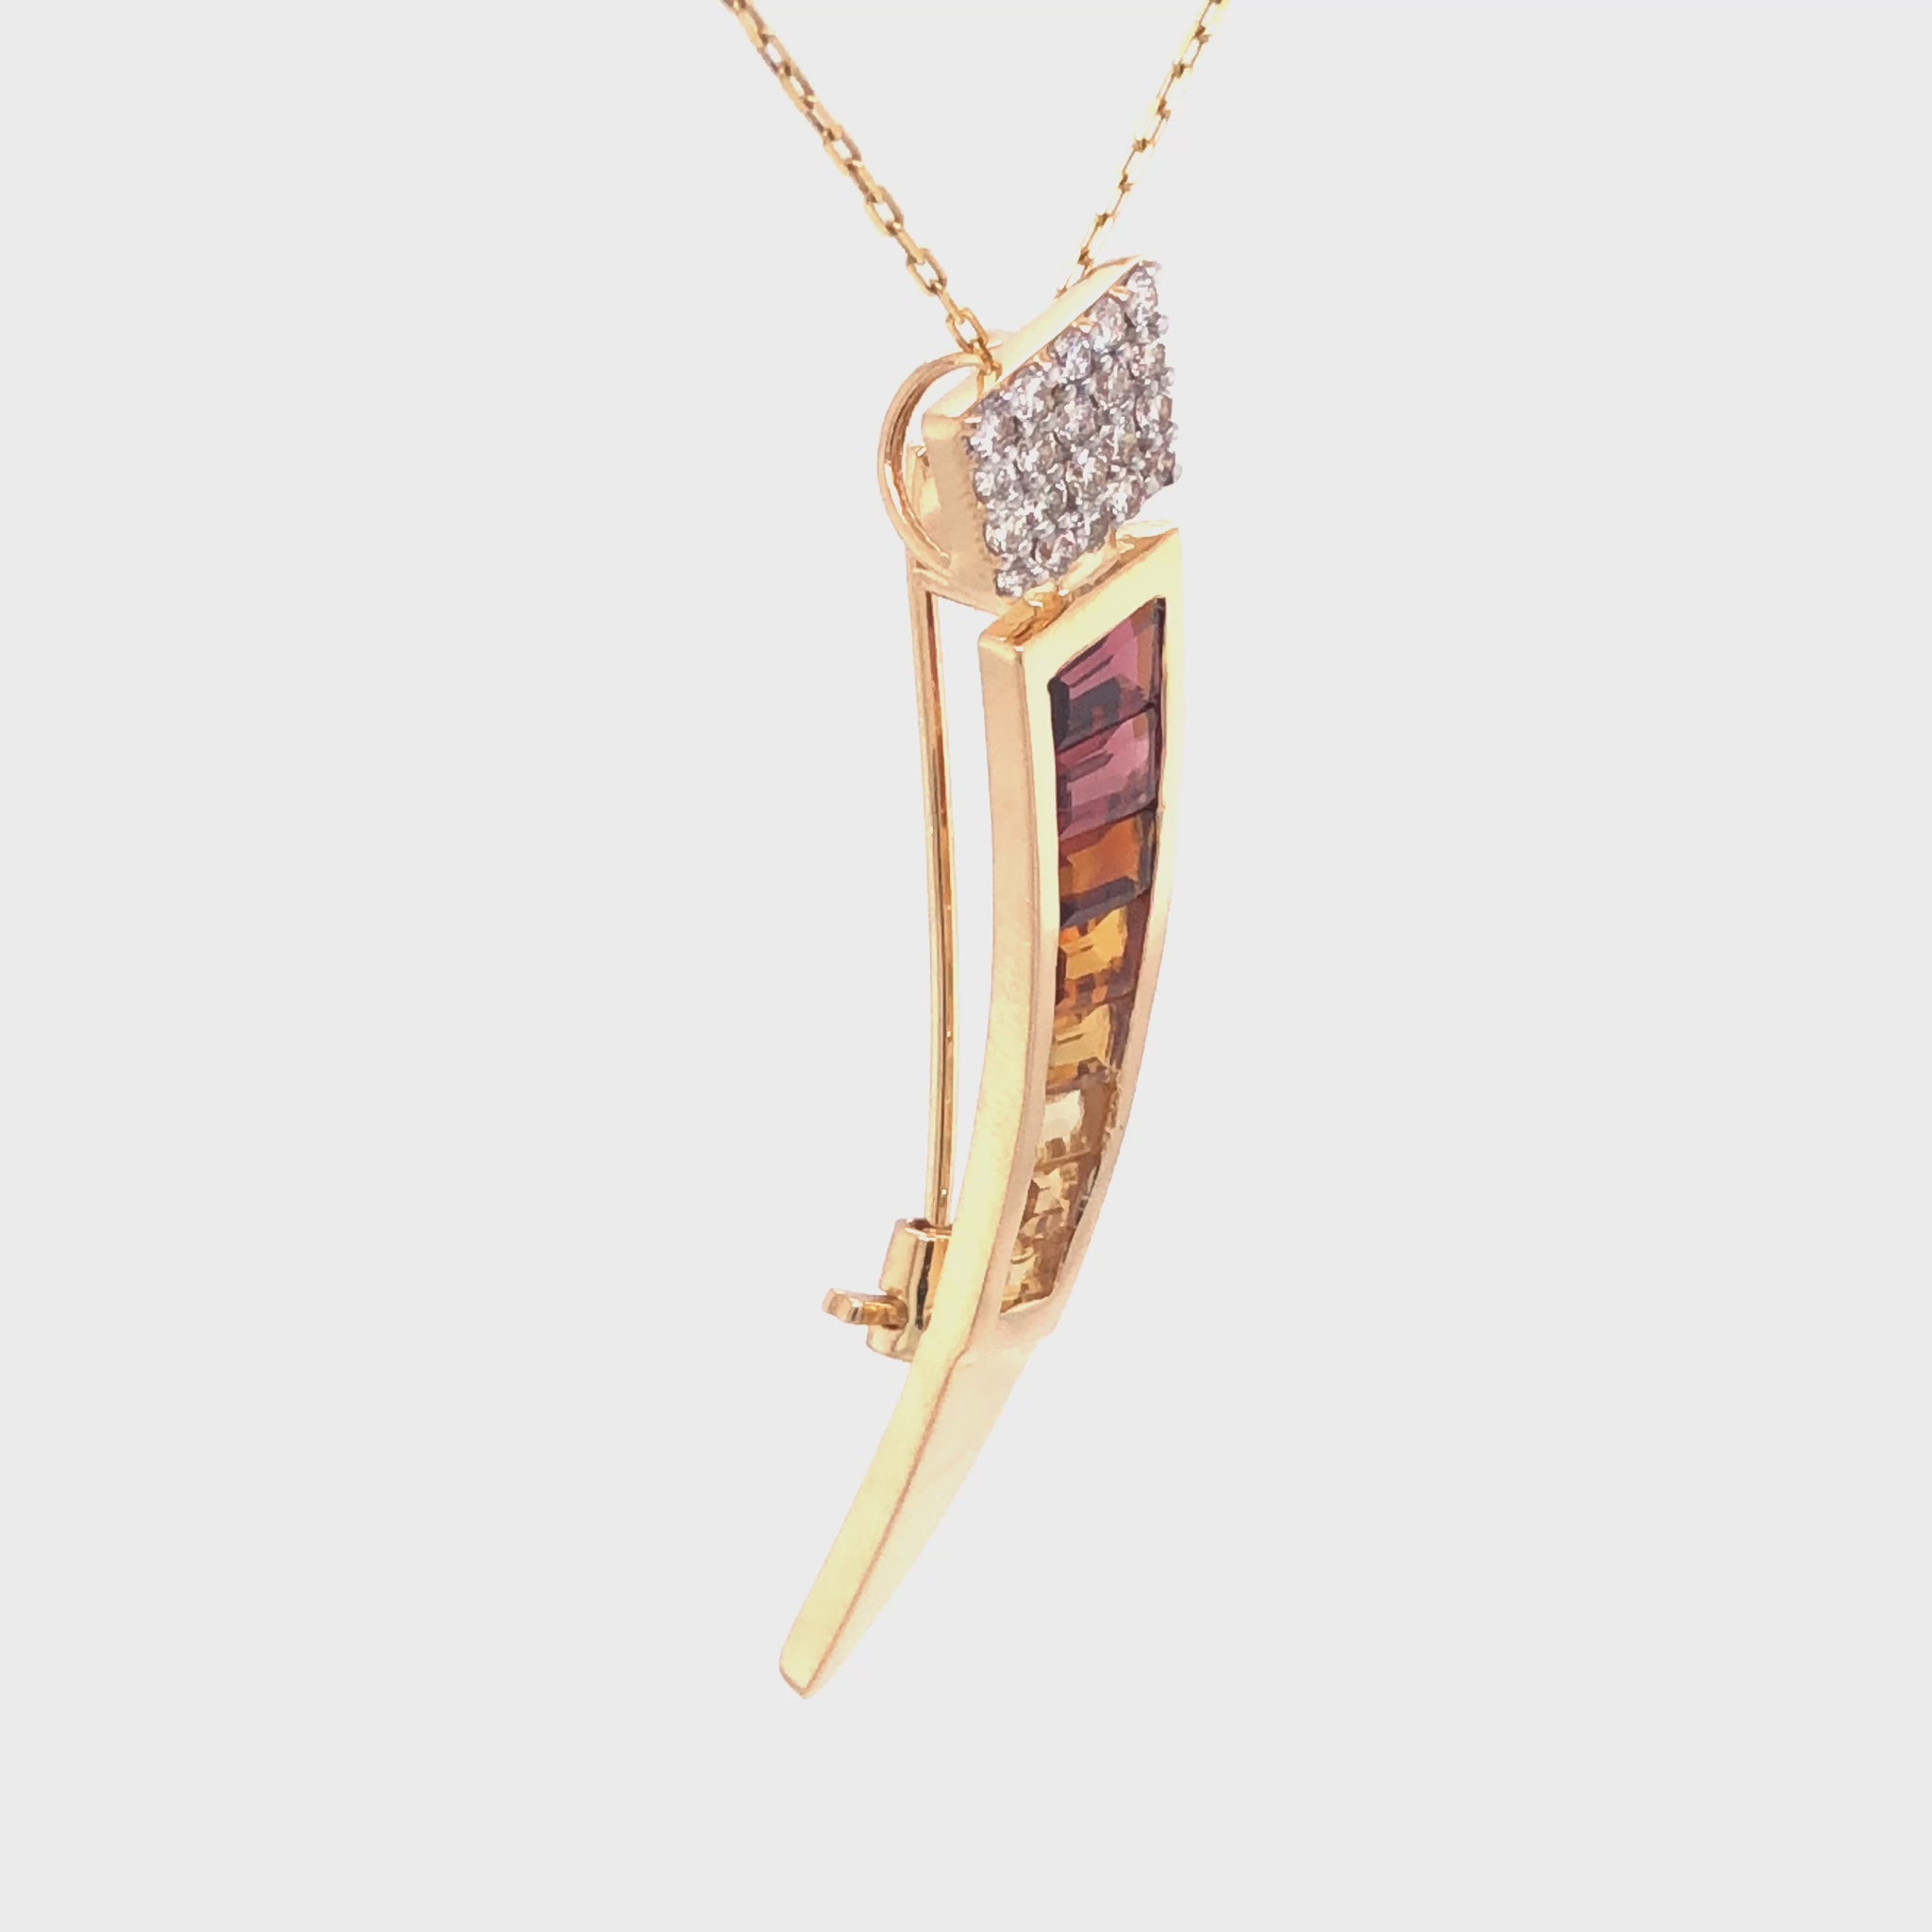 Stylish citrine necklace with baguette diamonds